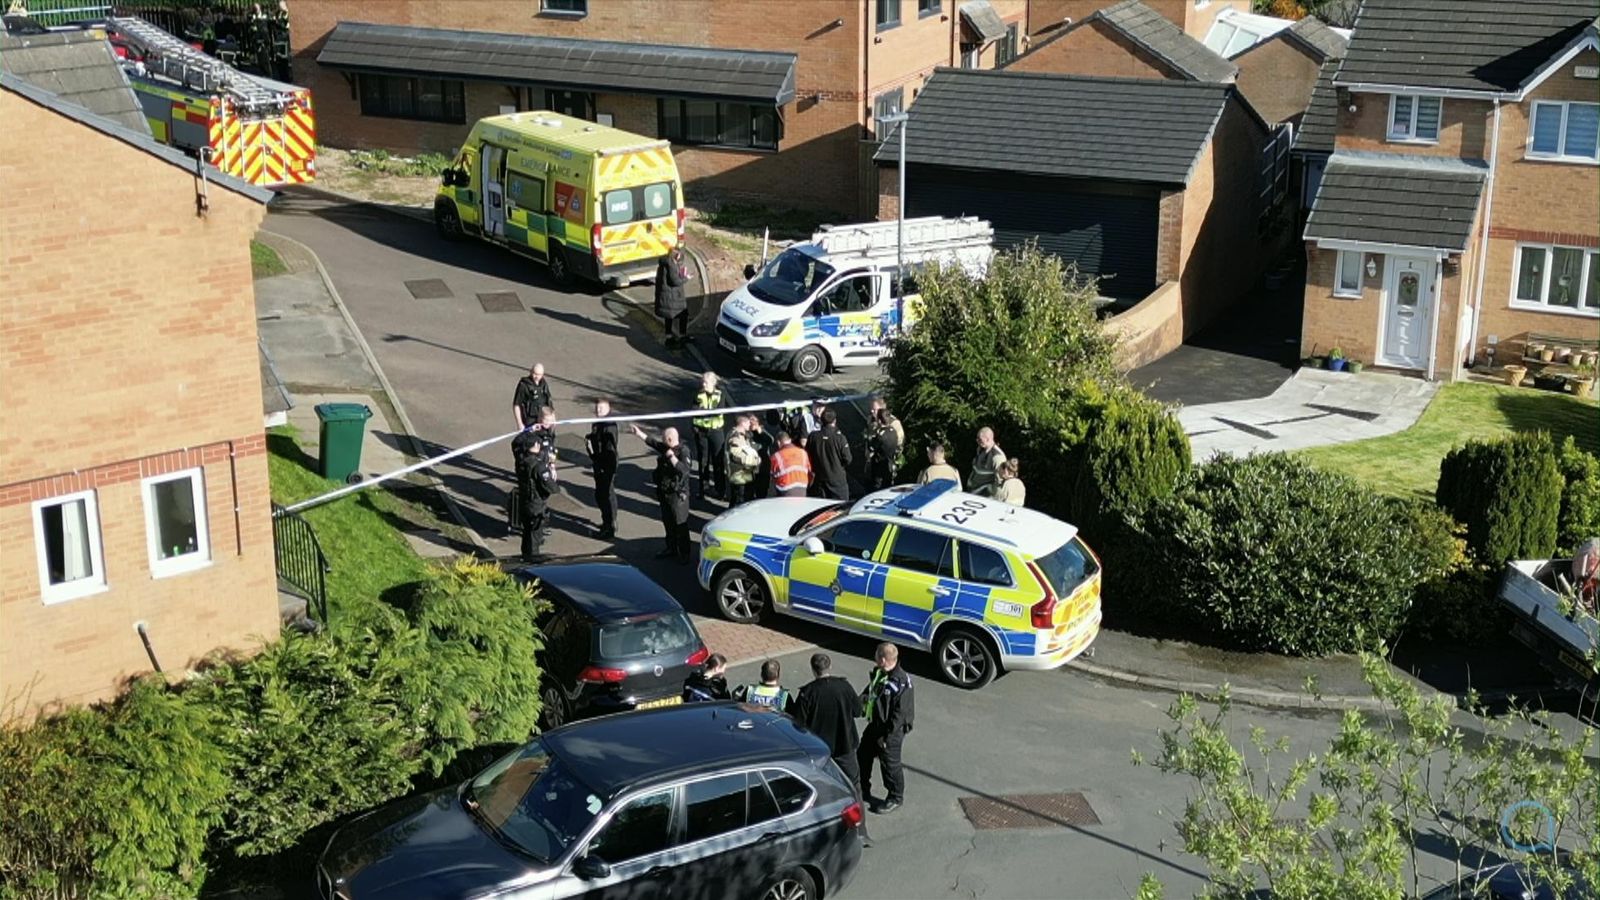 Bradford: Two arrested after man found dead at property